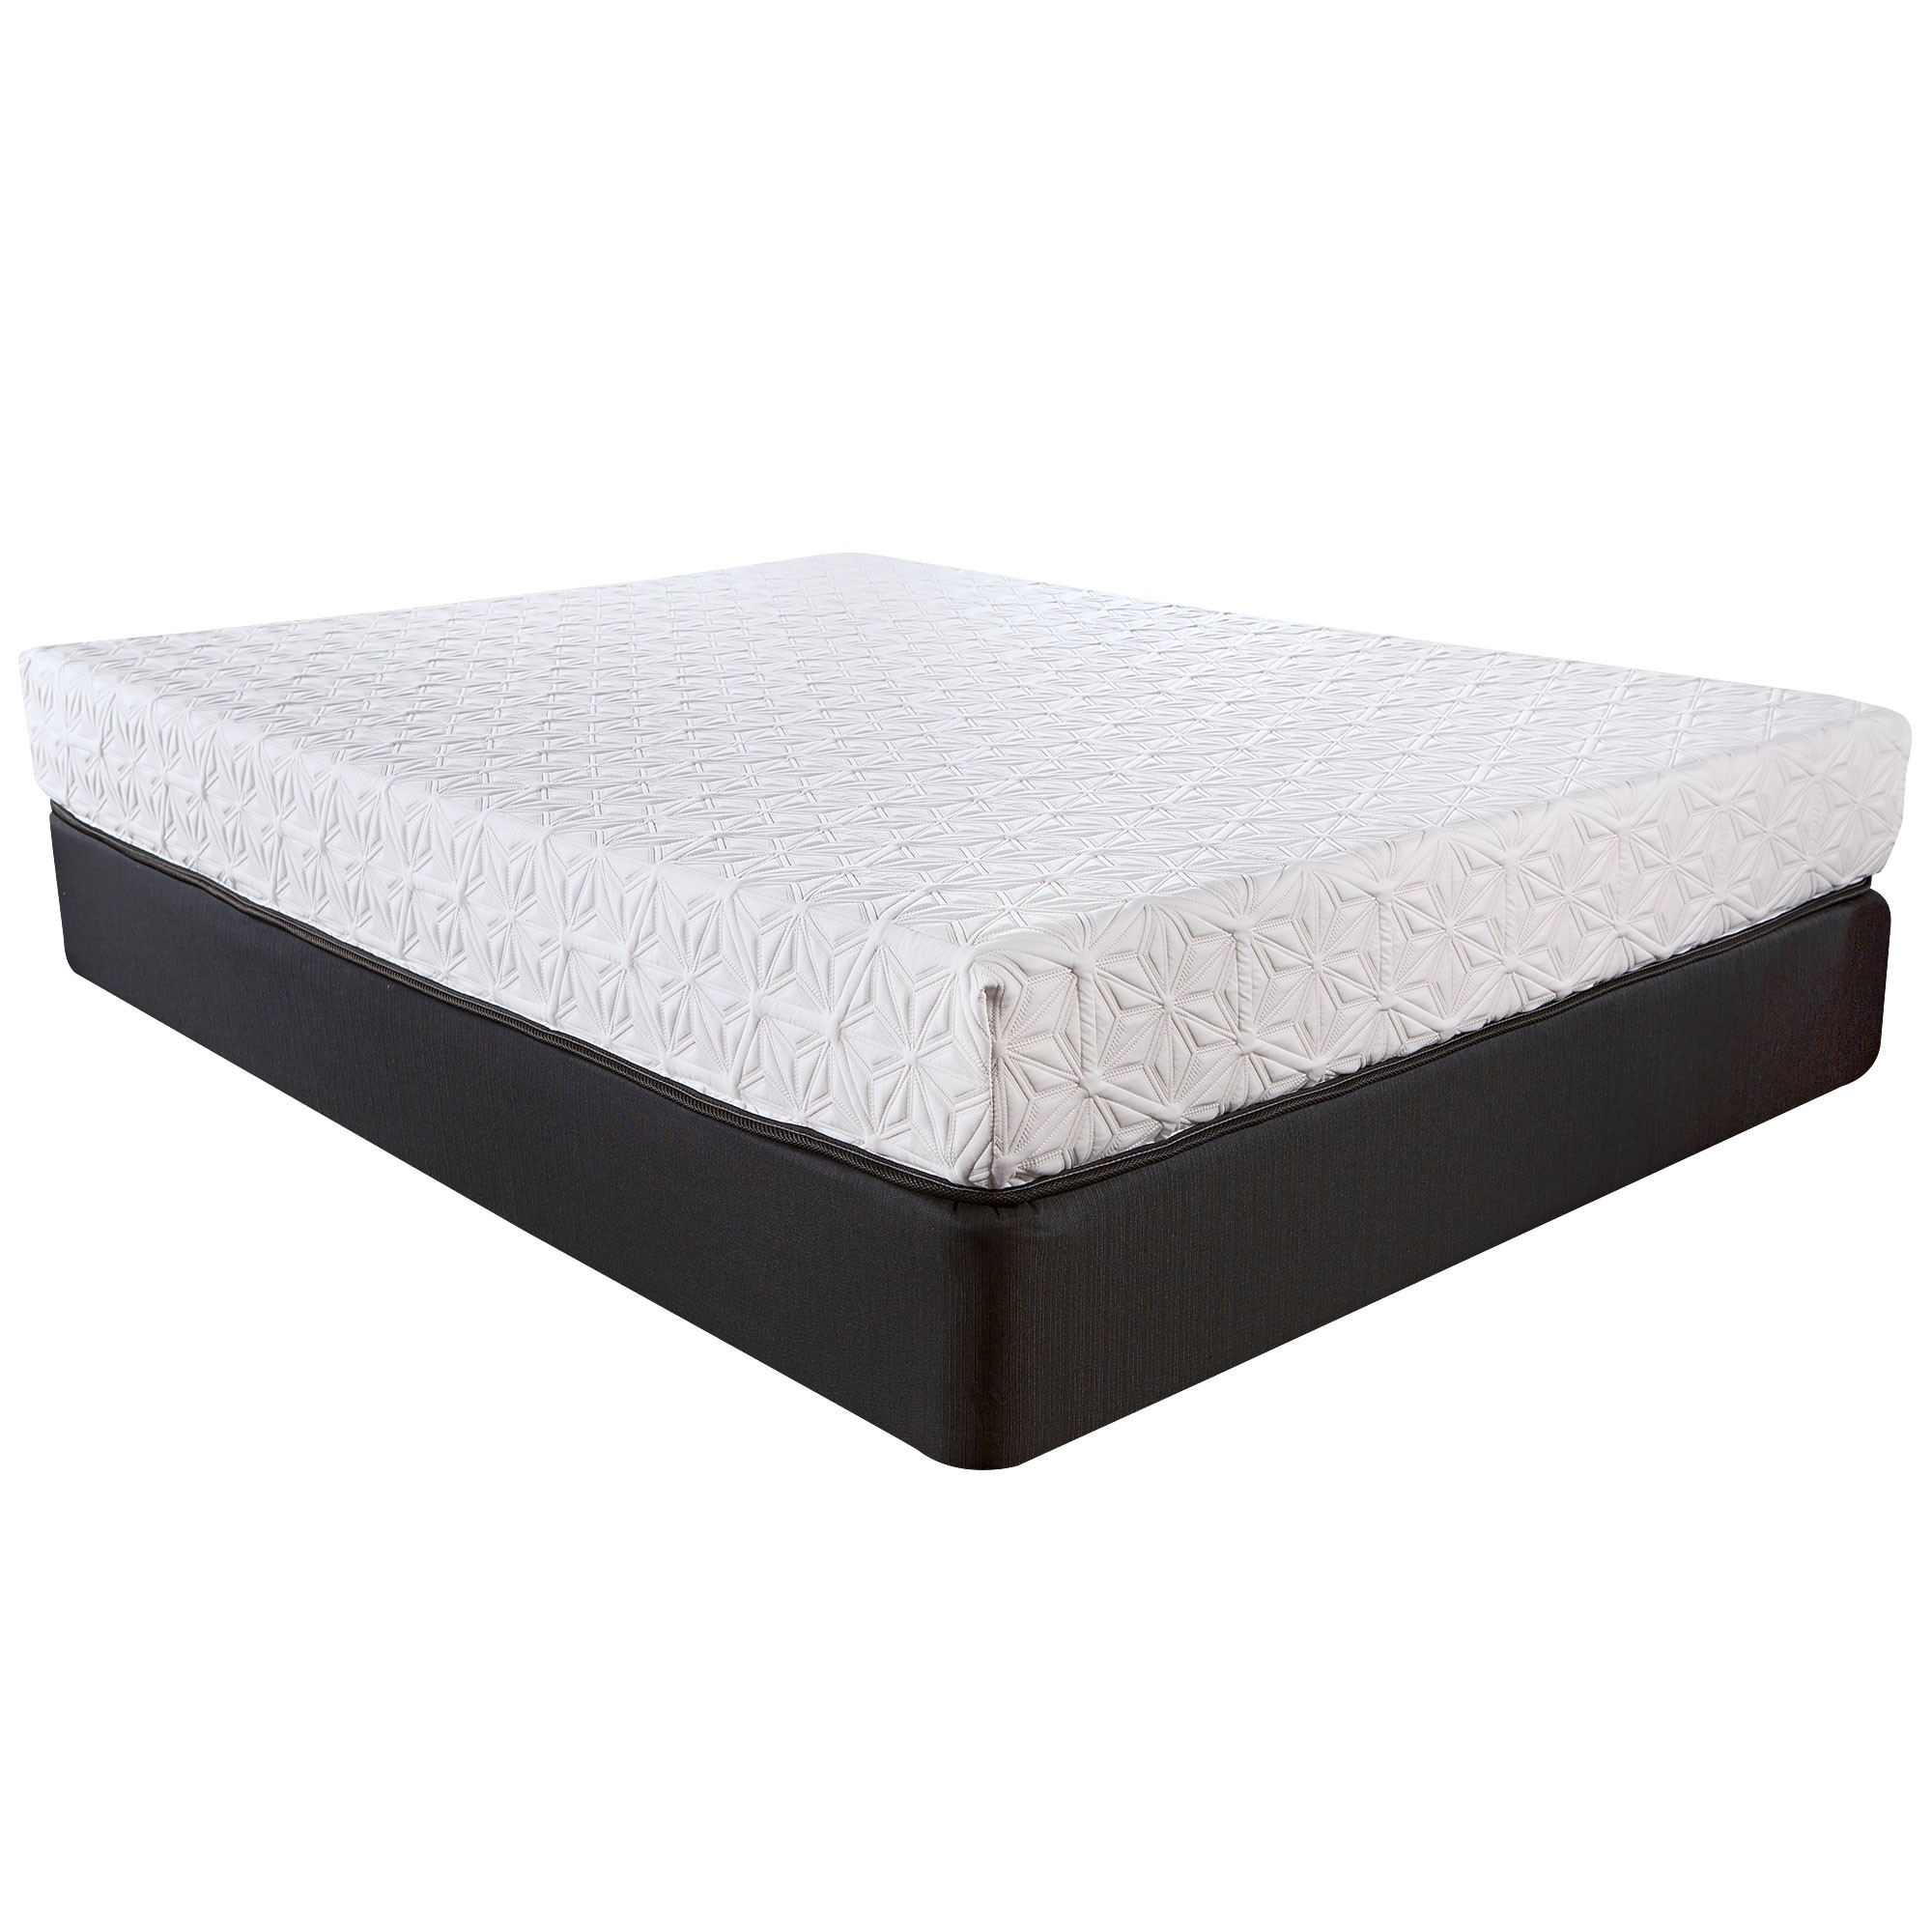 8" Three Layer Gel Infused Memory Foam Smooth Top Mattress  Queen-391681-1